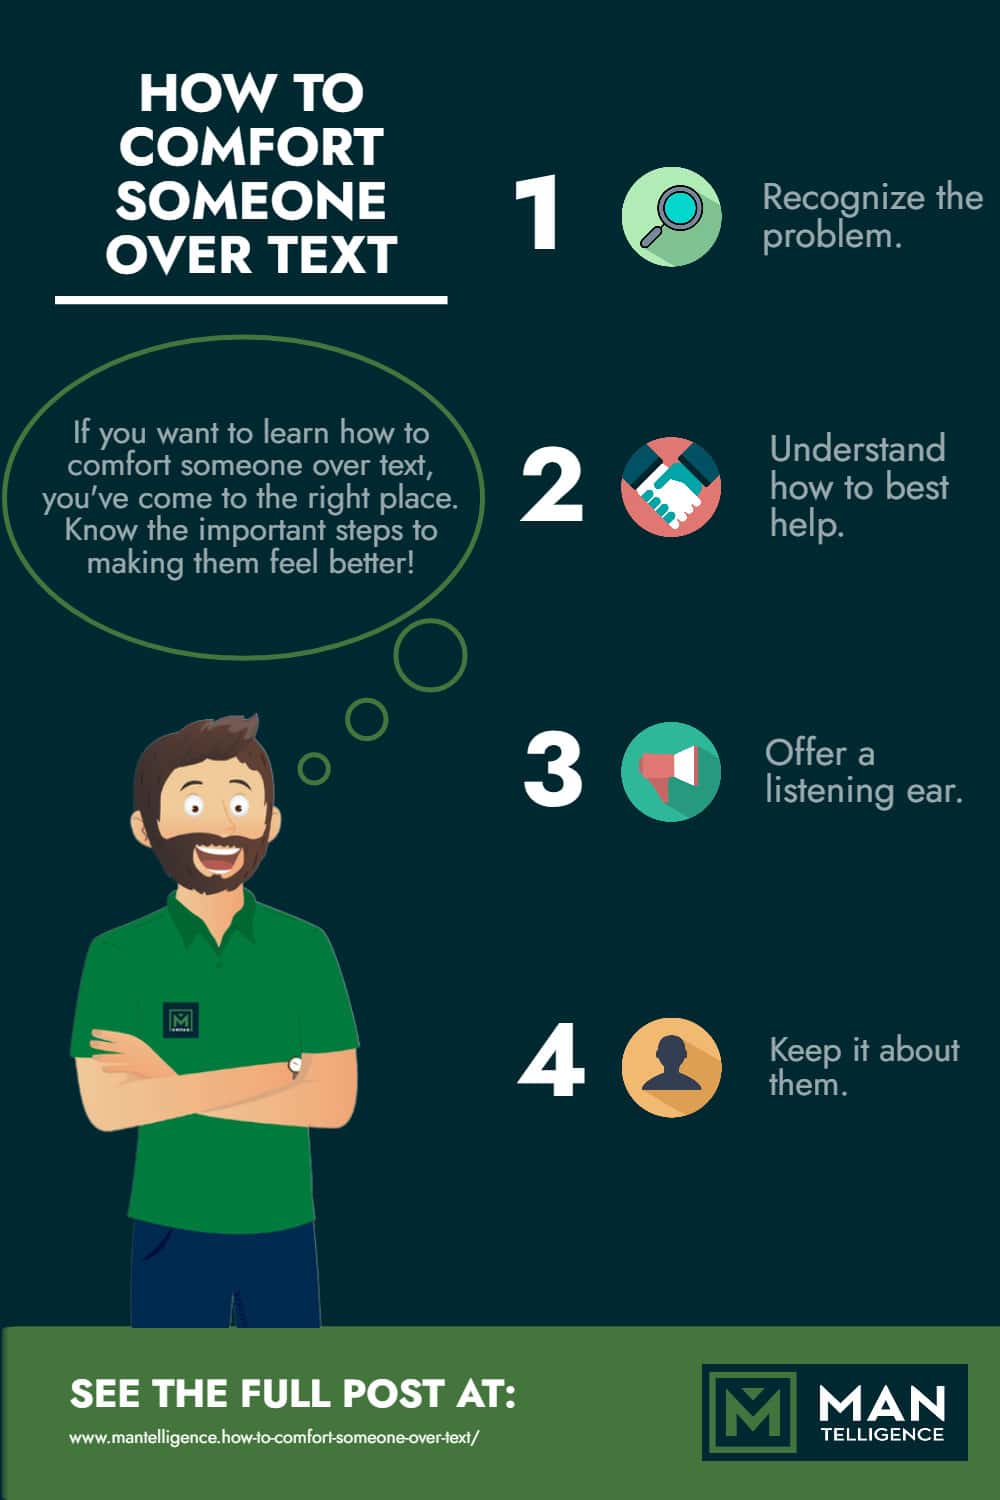 How to Comfort Someone Over Text - Infographic